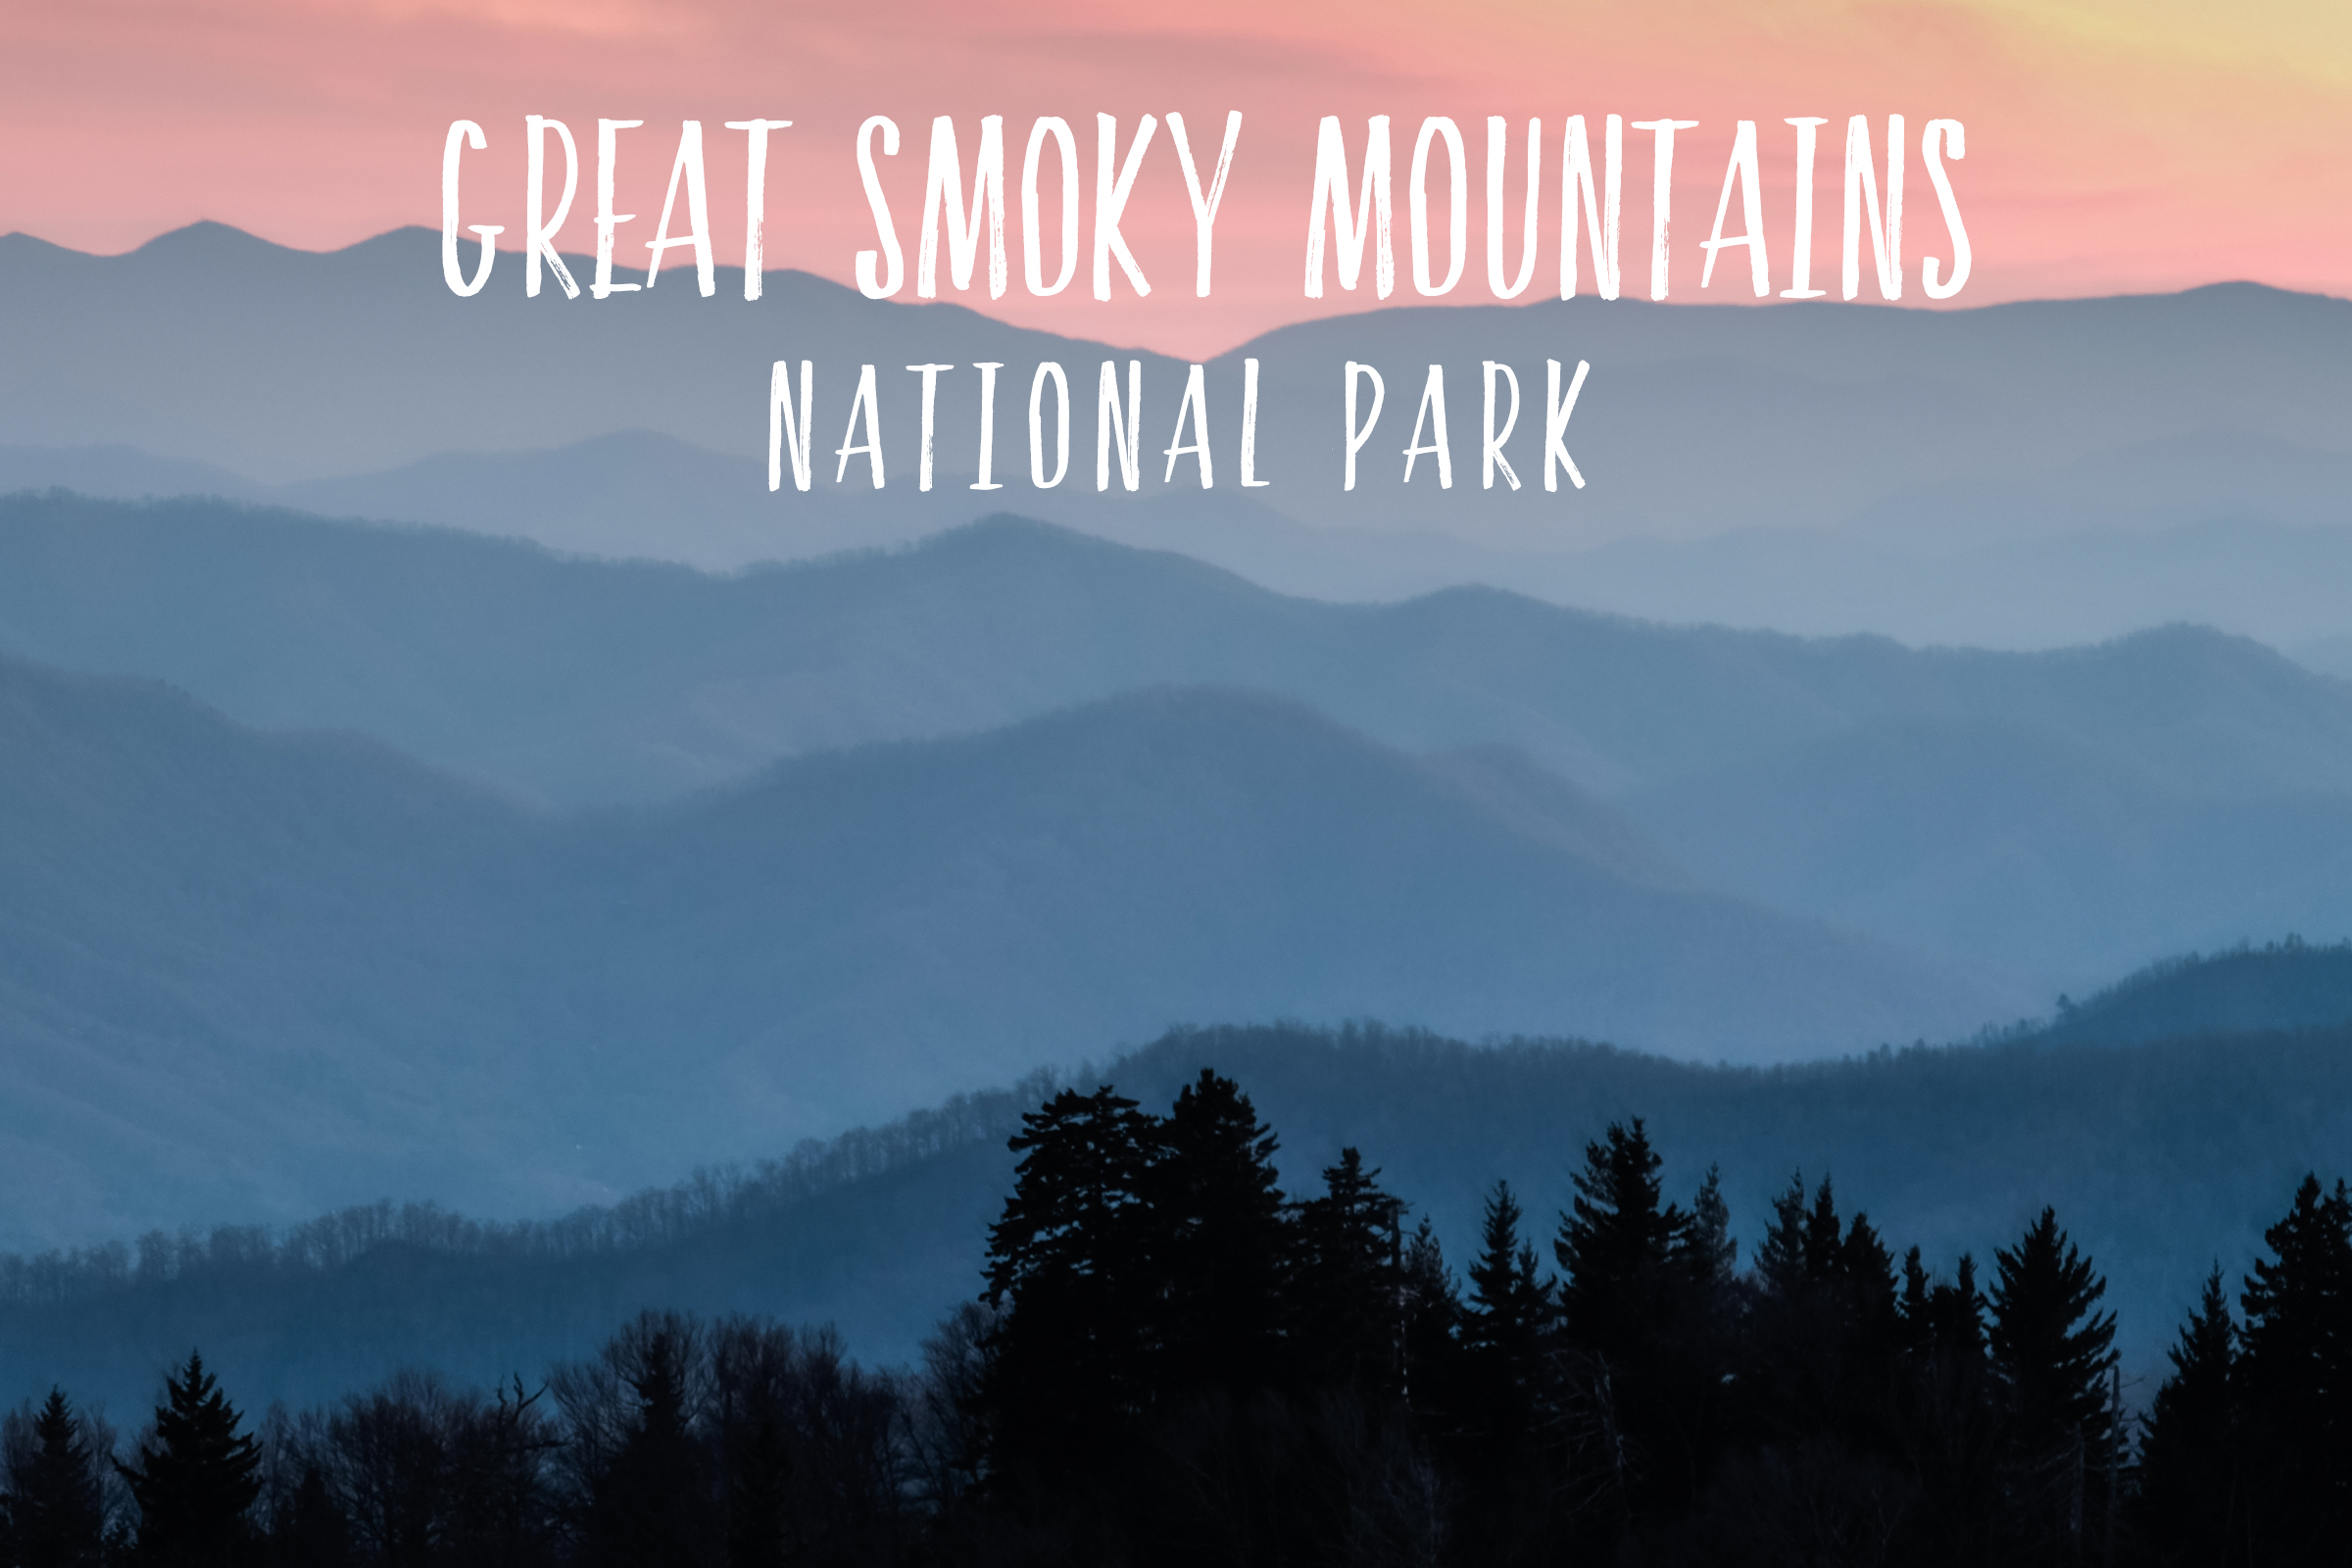 Great Smoky Mountains National Park | Park 7/59